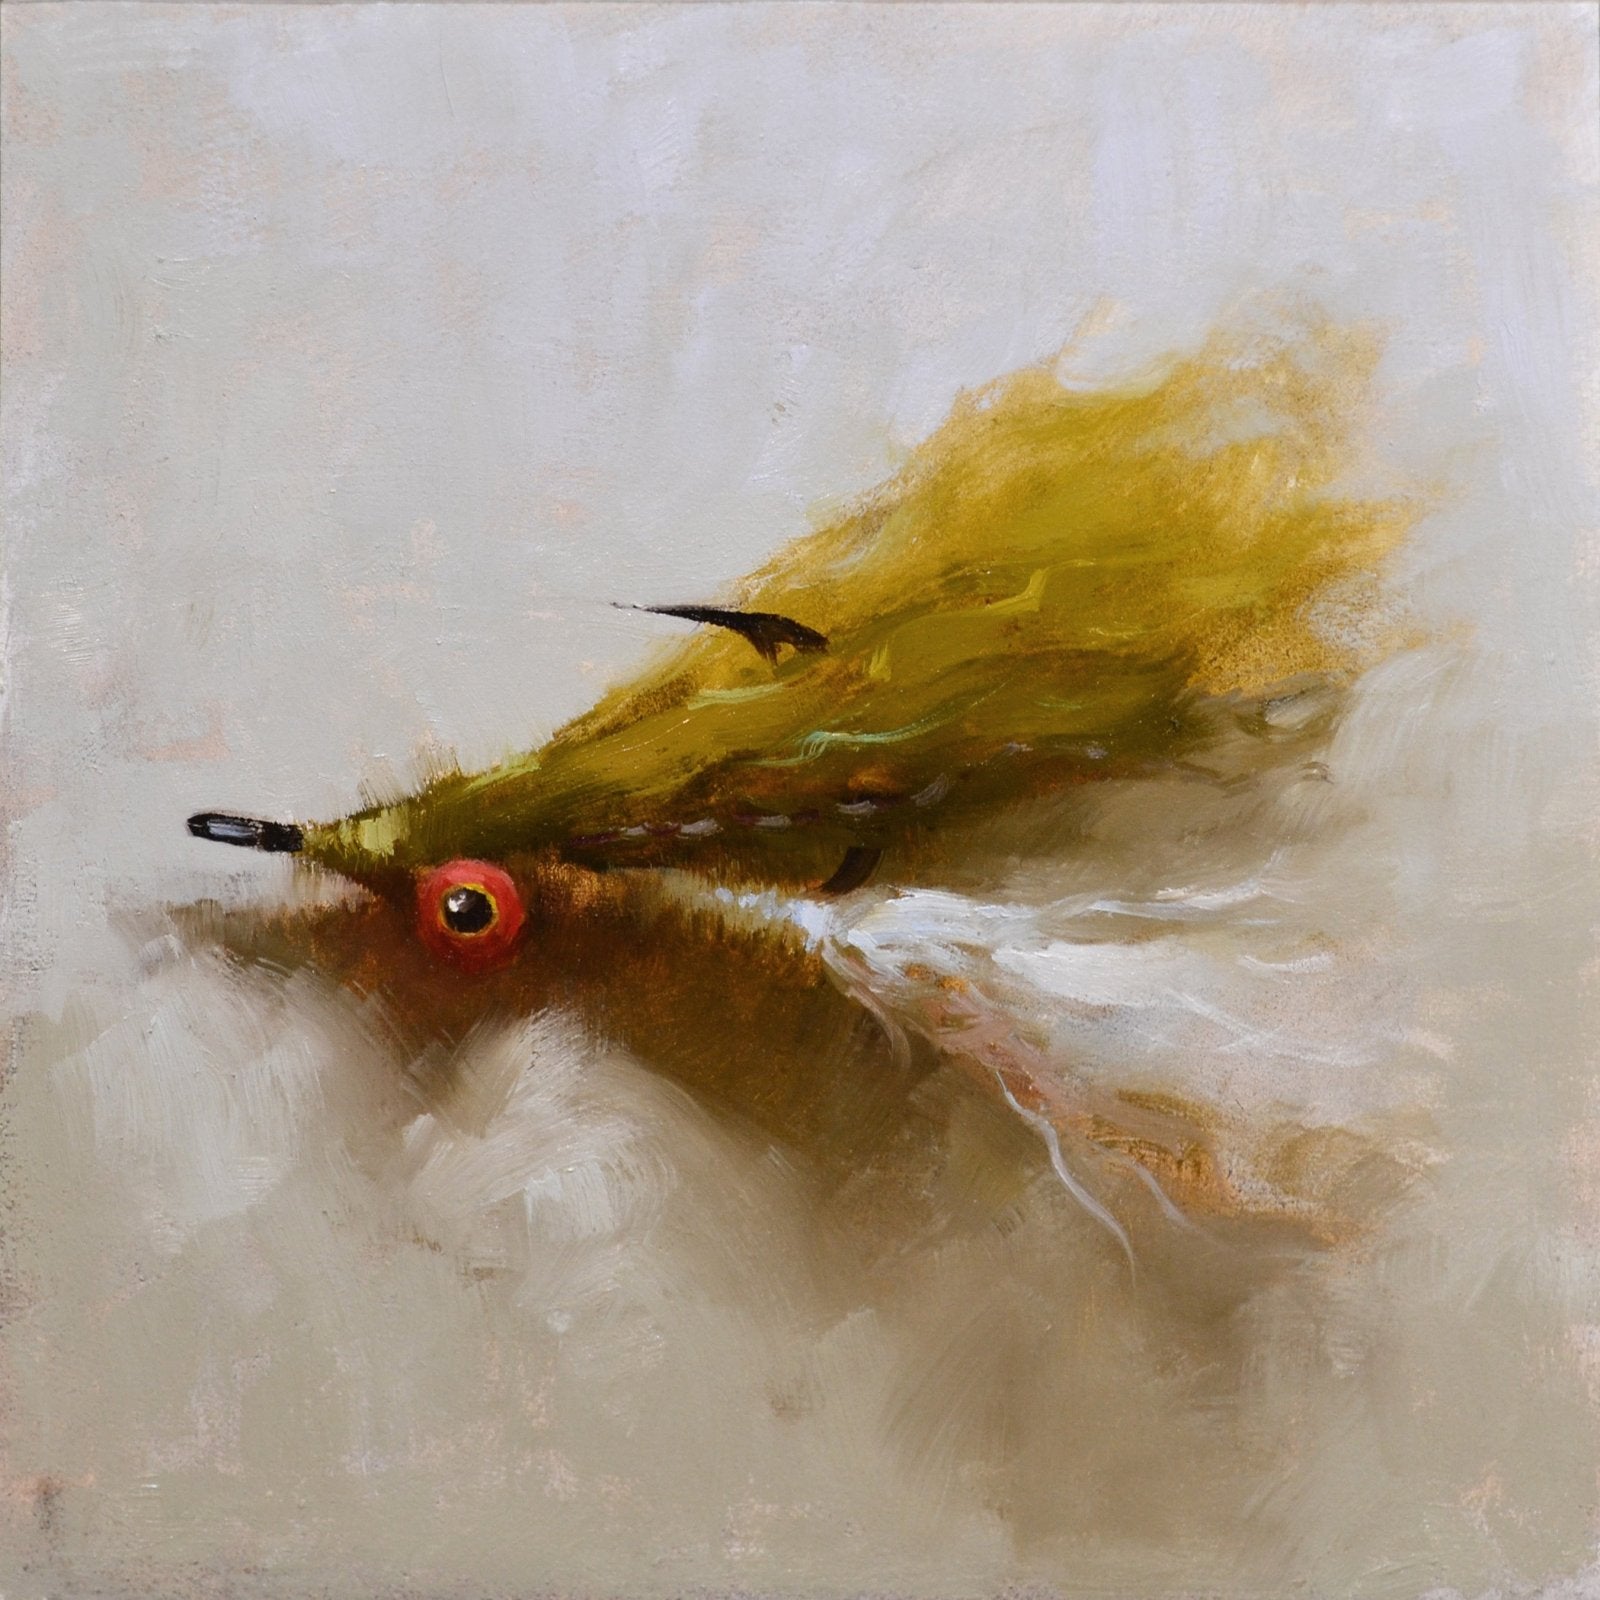 Olive Clouser Minnow by Marc Anderson at LePrince Galleries